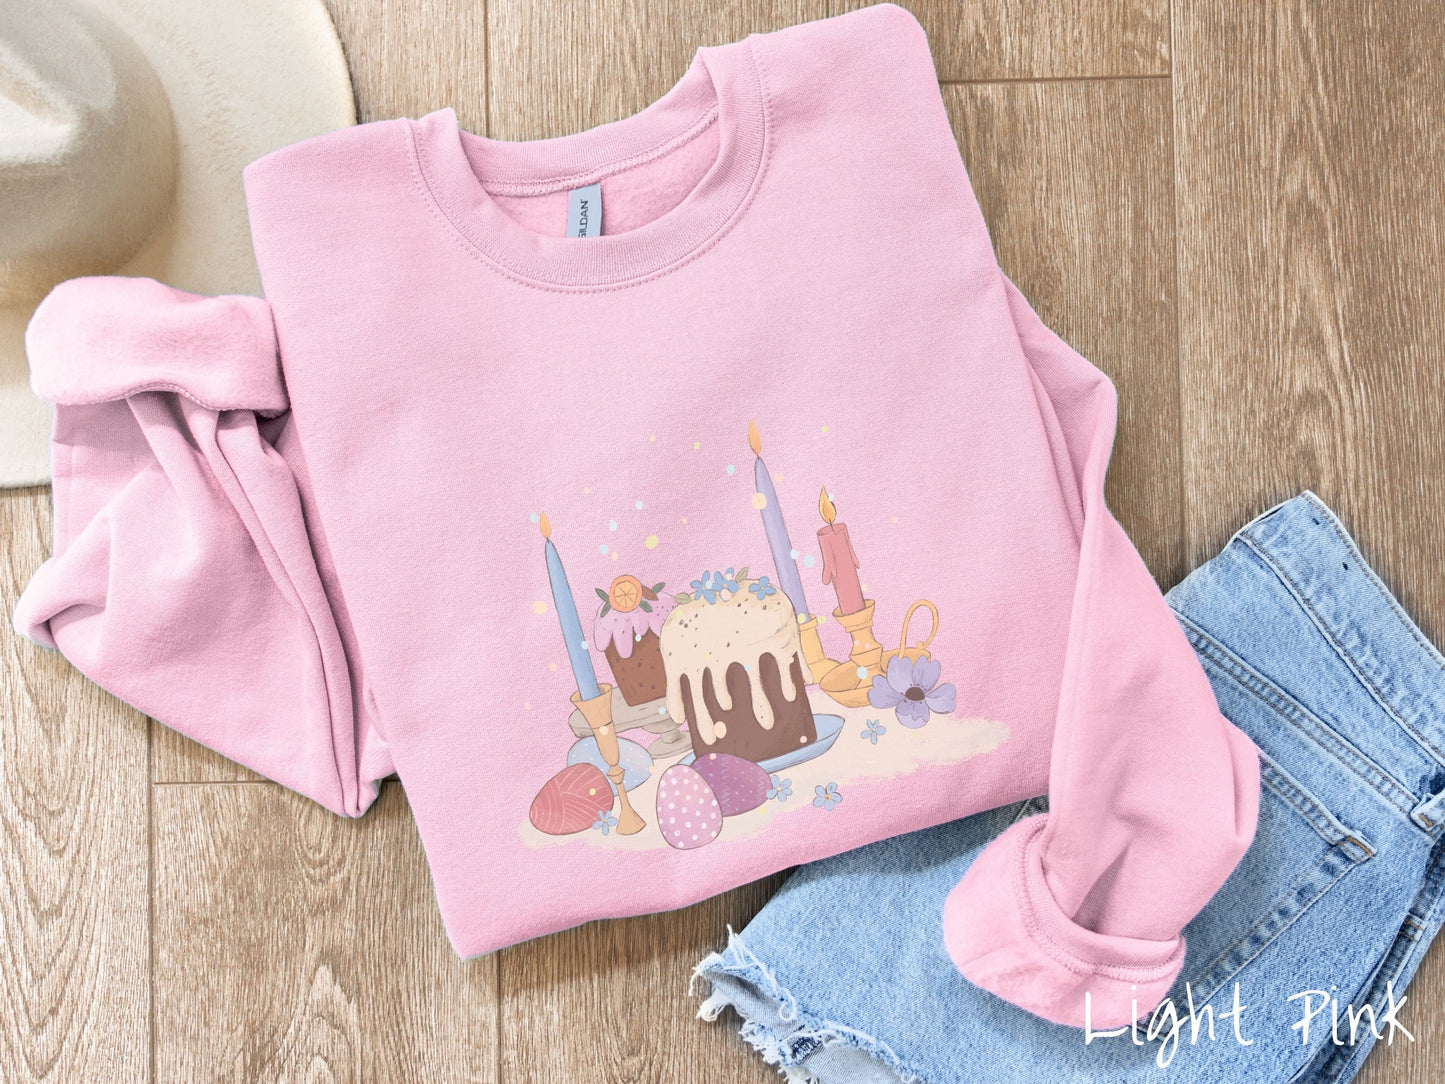 A cute, vintage light pink colored sweatshirt with an assortment of colorful candles with wax running down the sides in the center, scattered around the candles are pink, purple, red, and blue colored Easter eggs.